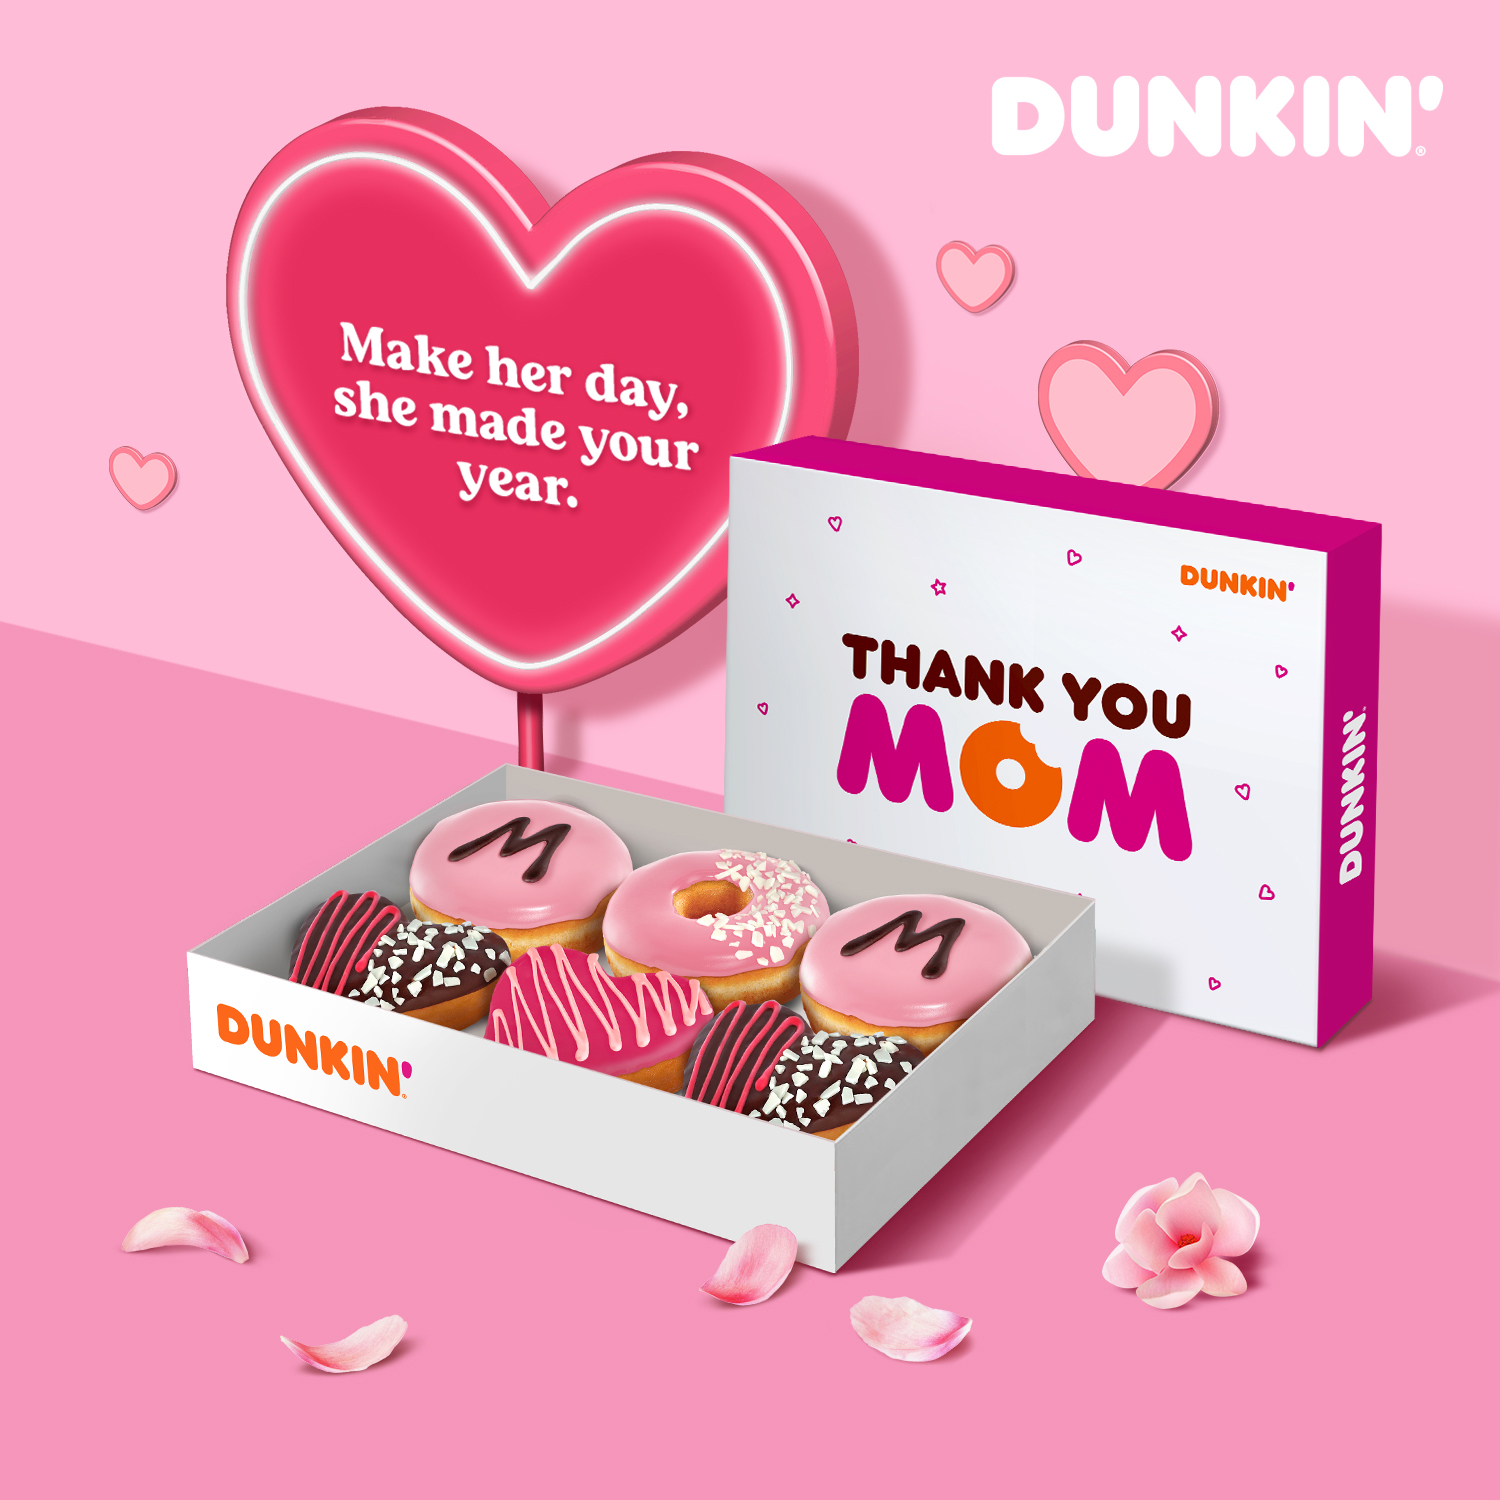 The Dunkin’ UAE Mother’s Day campaign that takes you on an emotional